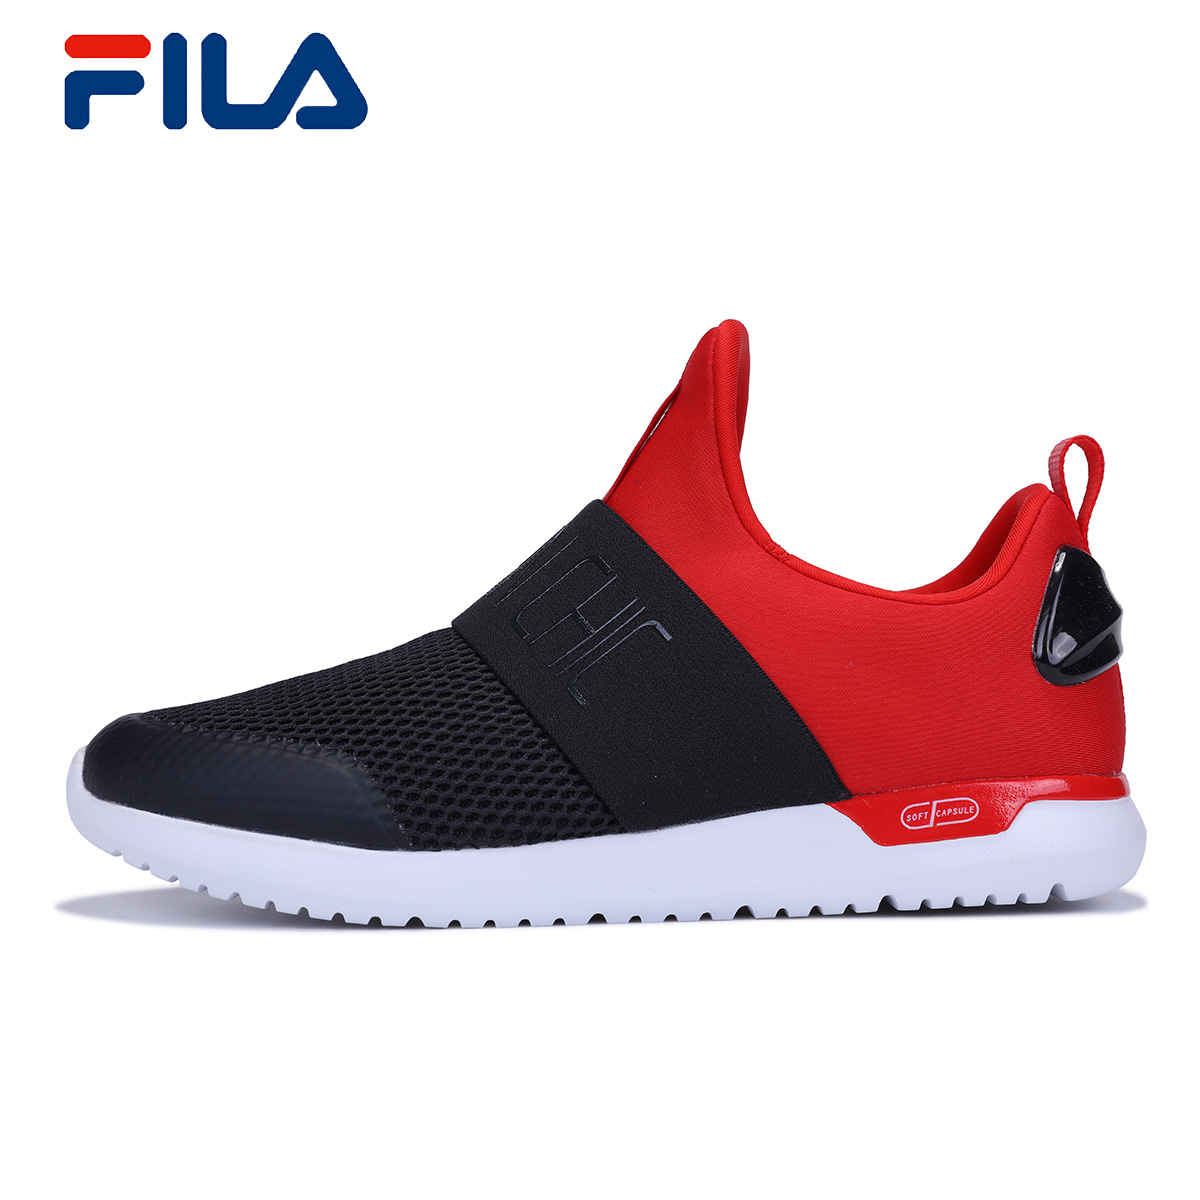 fila shoes lightbox moreview · lightbox moreview ... GNACZYB